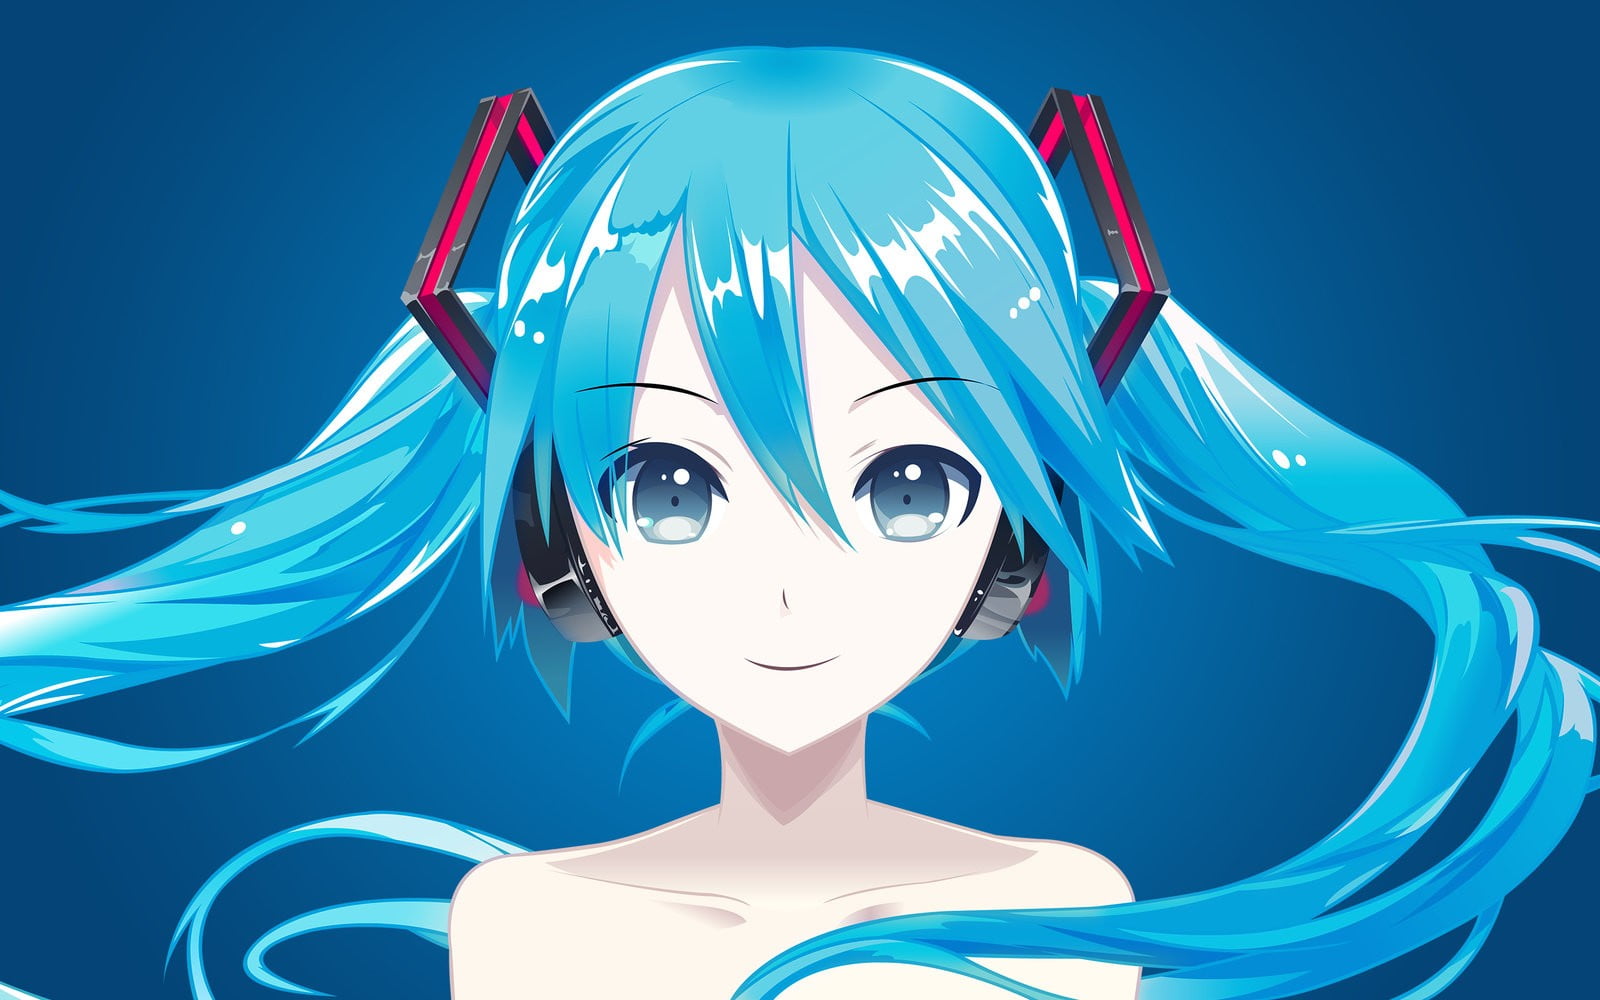 Online Crop White And Blue Anime Character Hatsune Miku Vector